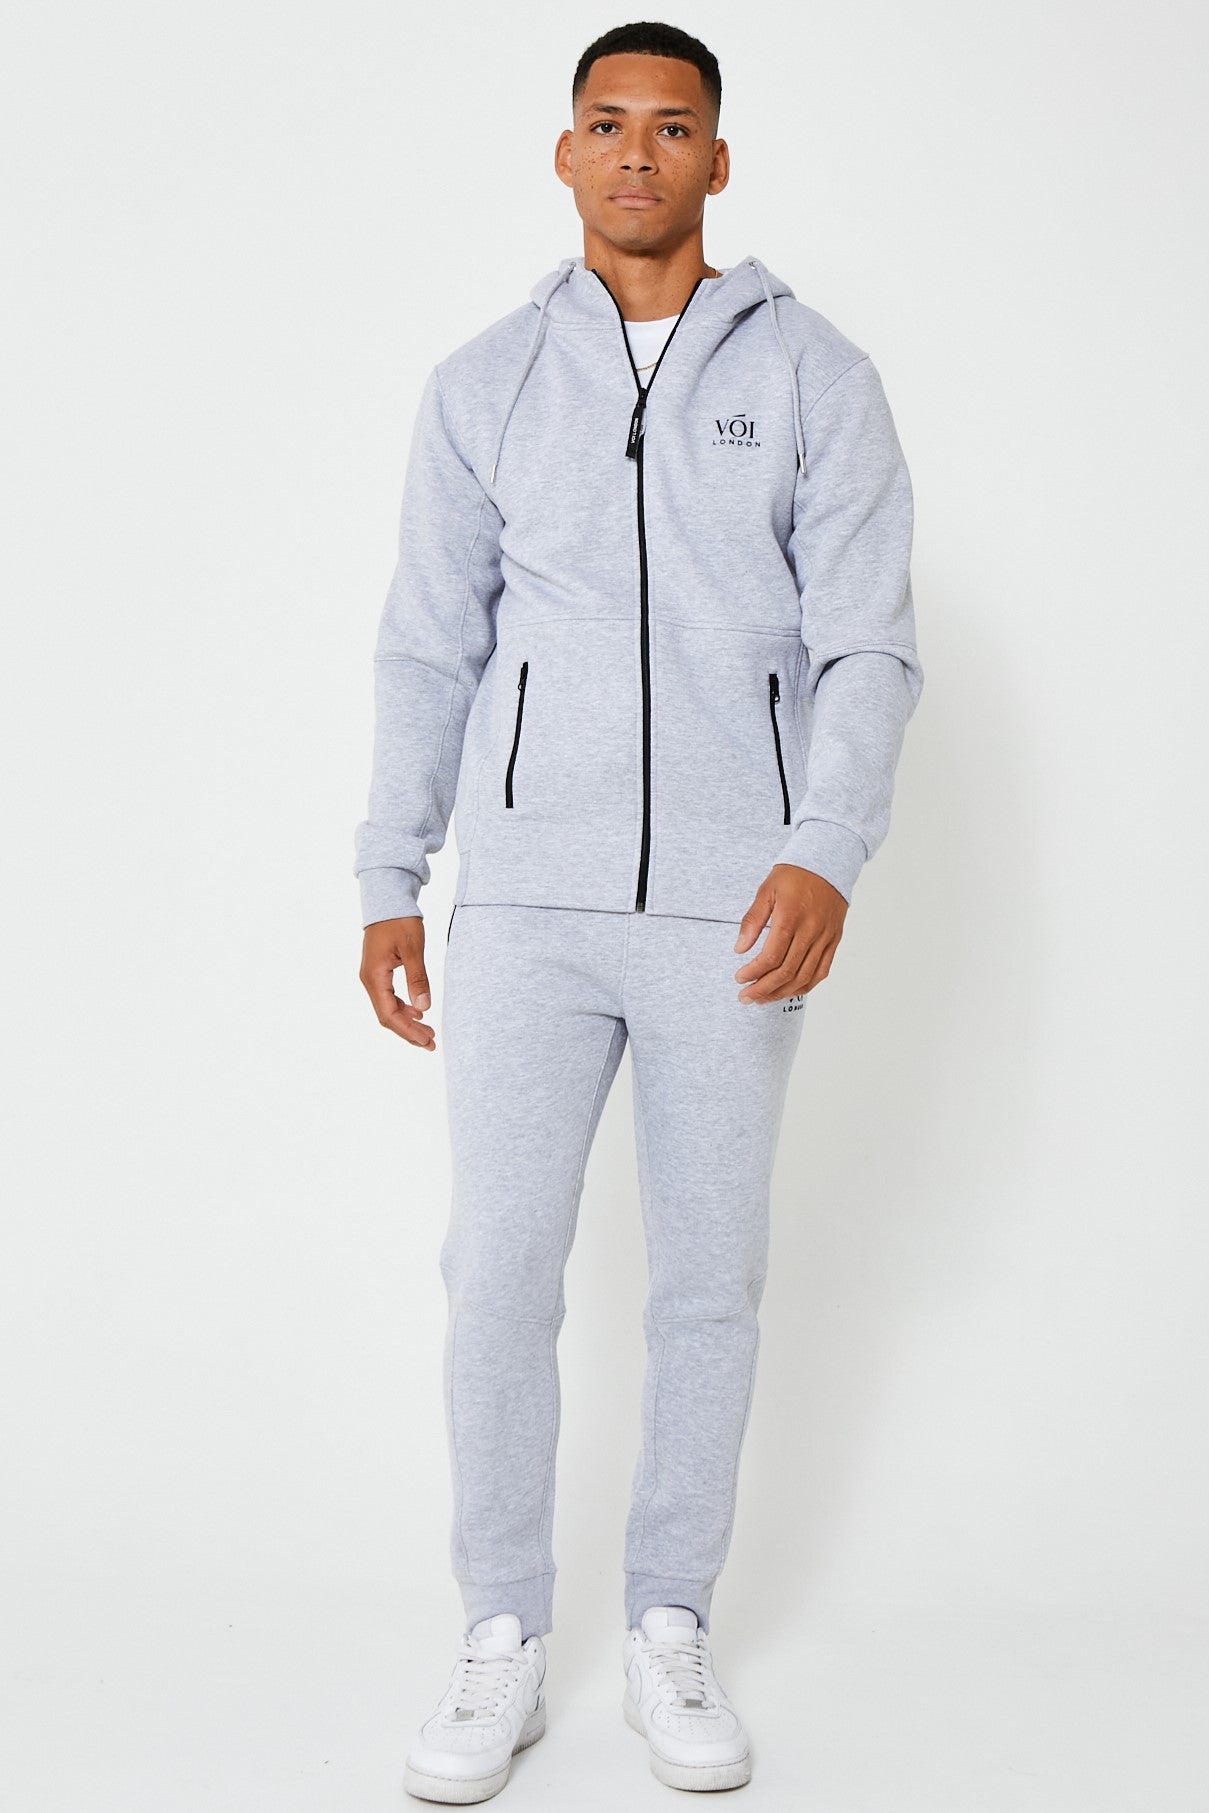 Mens Full Tracksuit Sets  Pullover & Zip Hoodies With Joggers